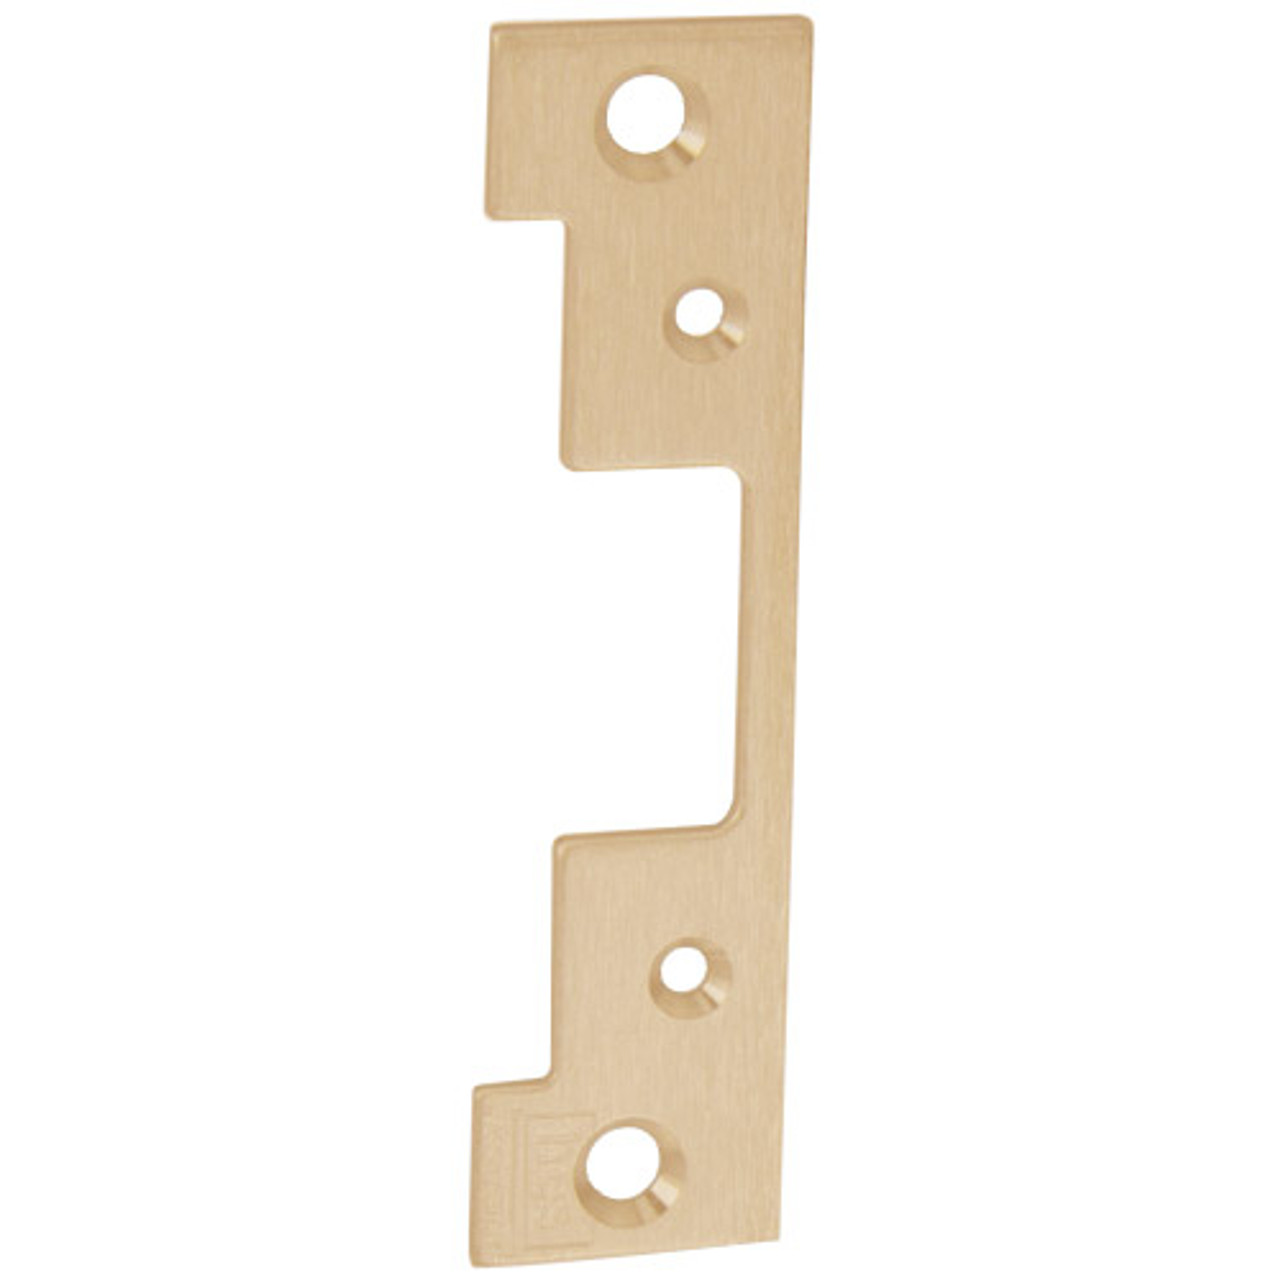 503-612 Hes 6-7/8 x 1-1/4" Faceplate in Satin Bronze Finish